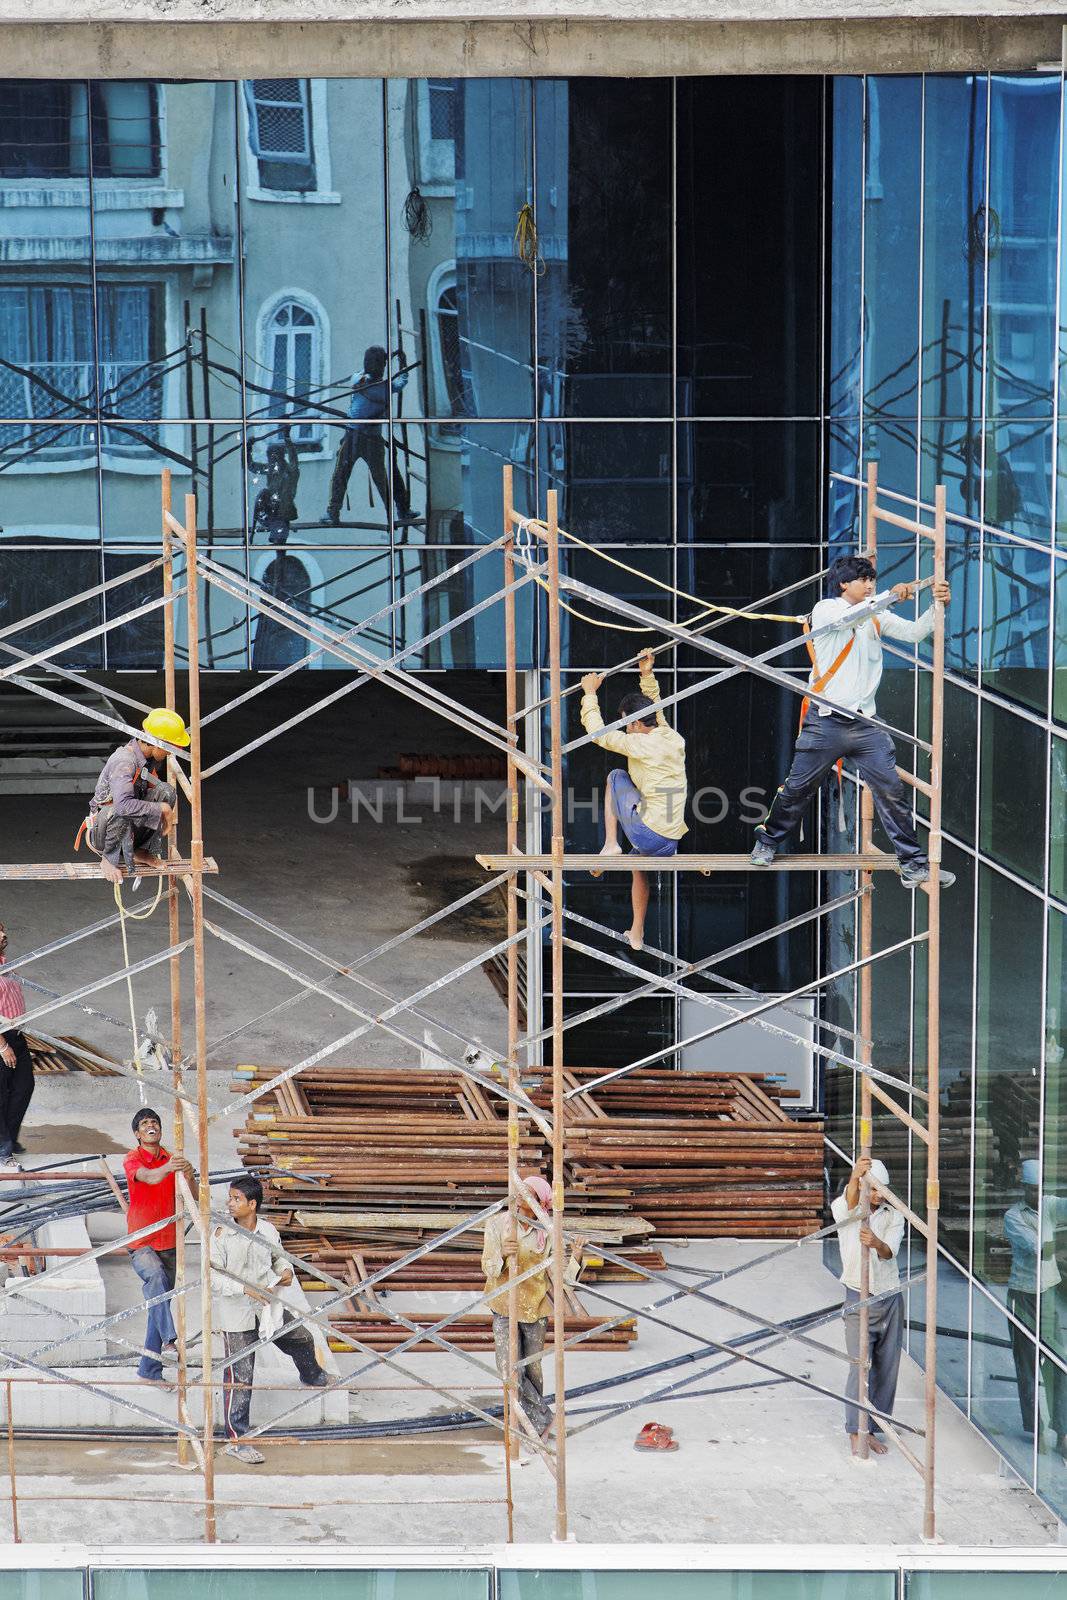 Scaffold workers erecting a scaffold on the upper floors of a high rise development on July 10, 2012 in Bombay, India. Local culture where workers operate in open toe slippers or bare feet.